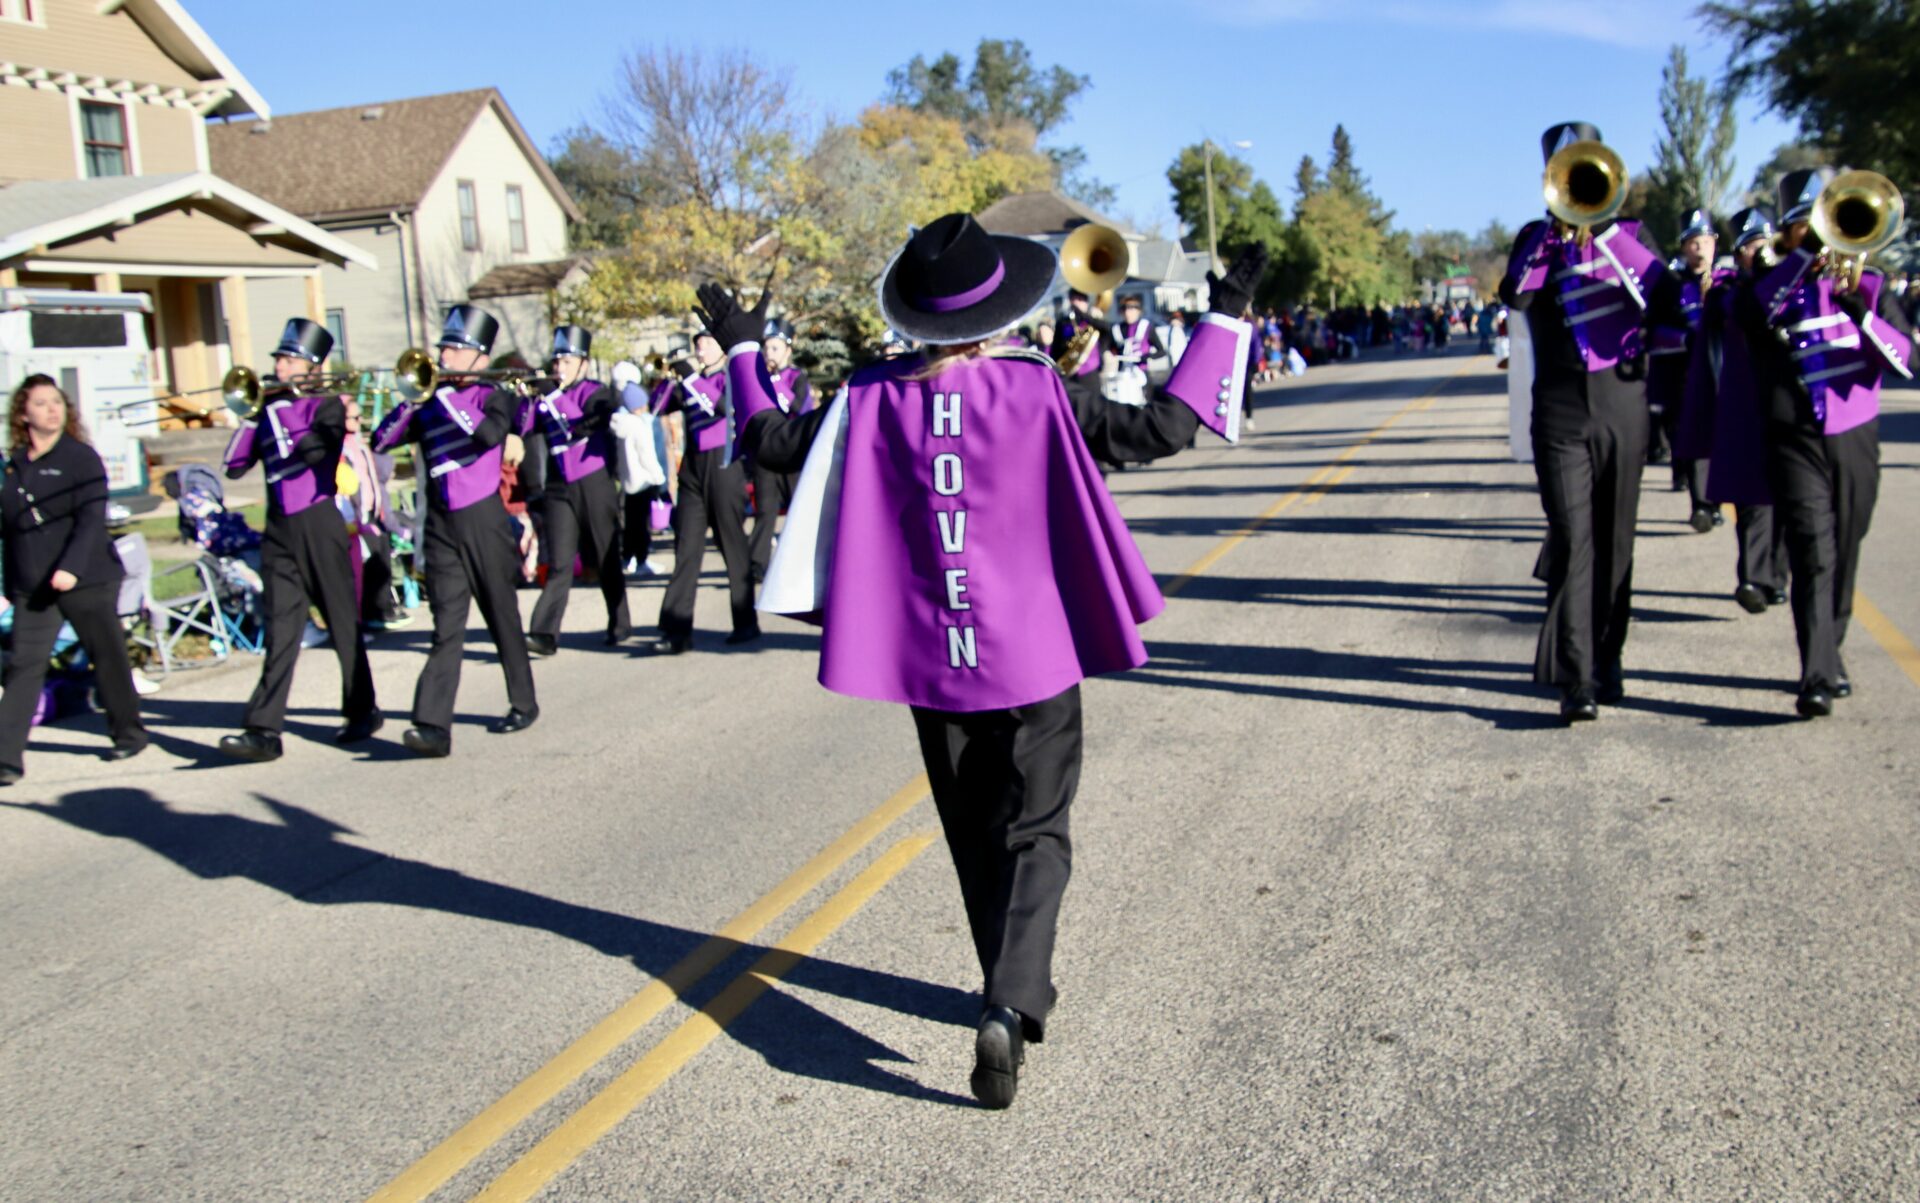 The Hoven High School Marching Band was in the Northern State homecoming parade on Saturday, Oct. 7. Aberdeen Insider photo by Scott Waltman